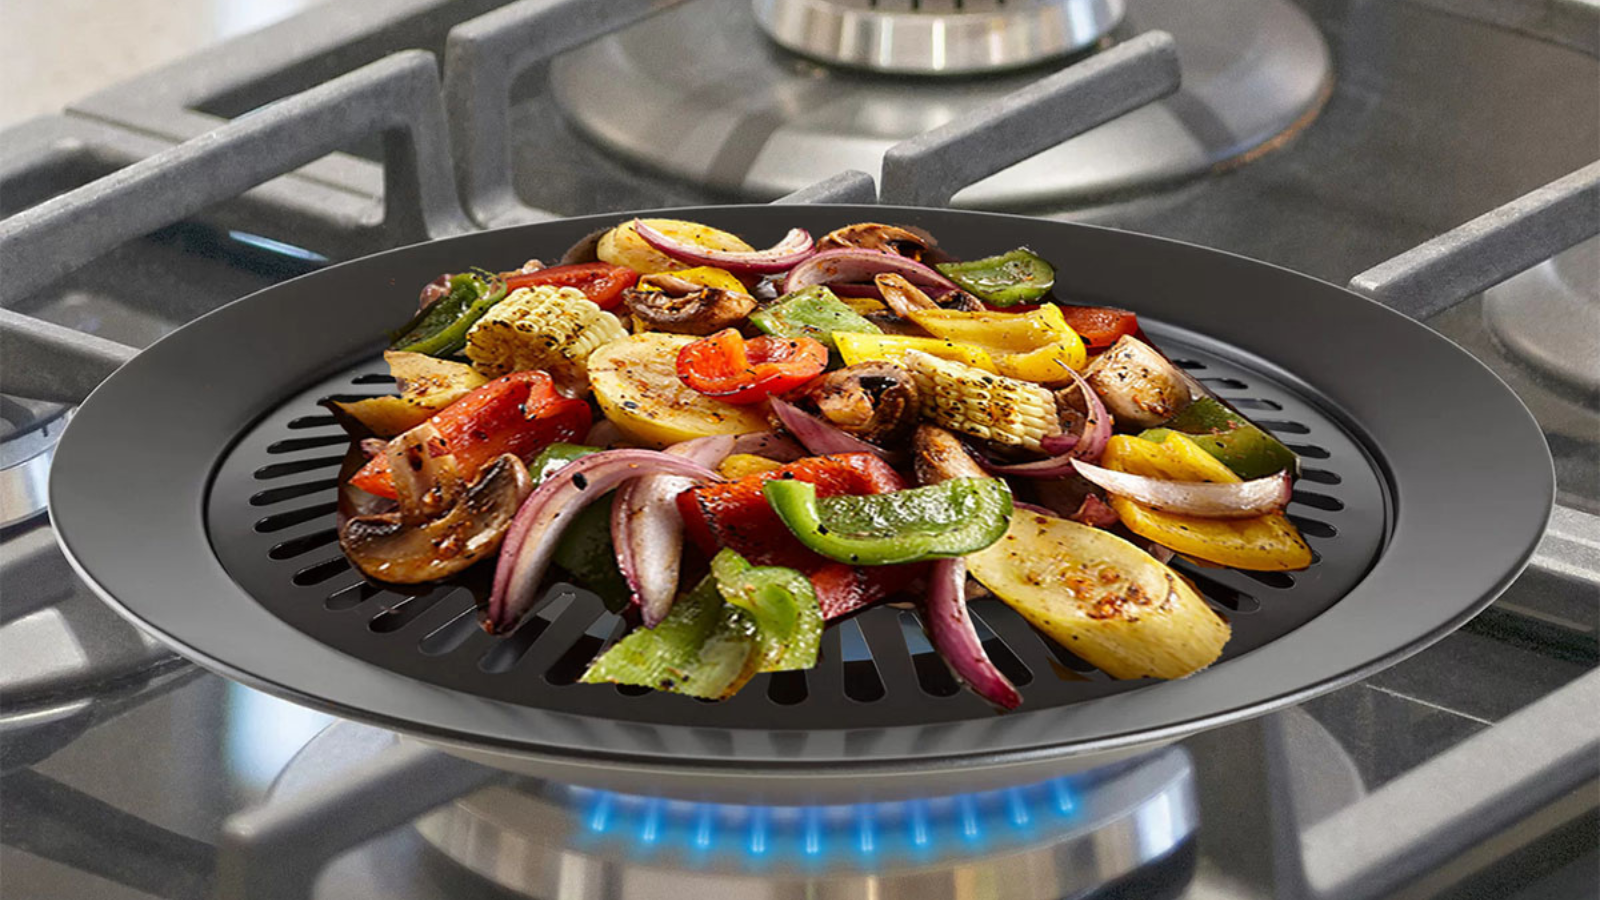 smokeless grill attachment on stove wit peppers and onions